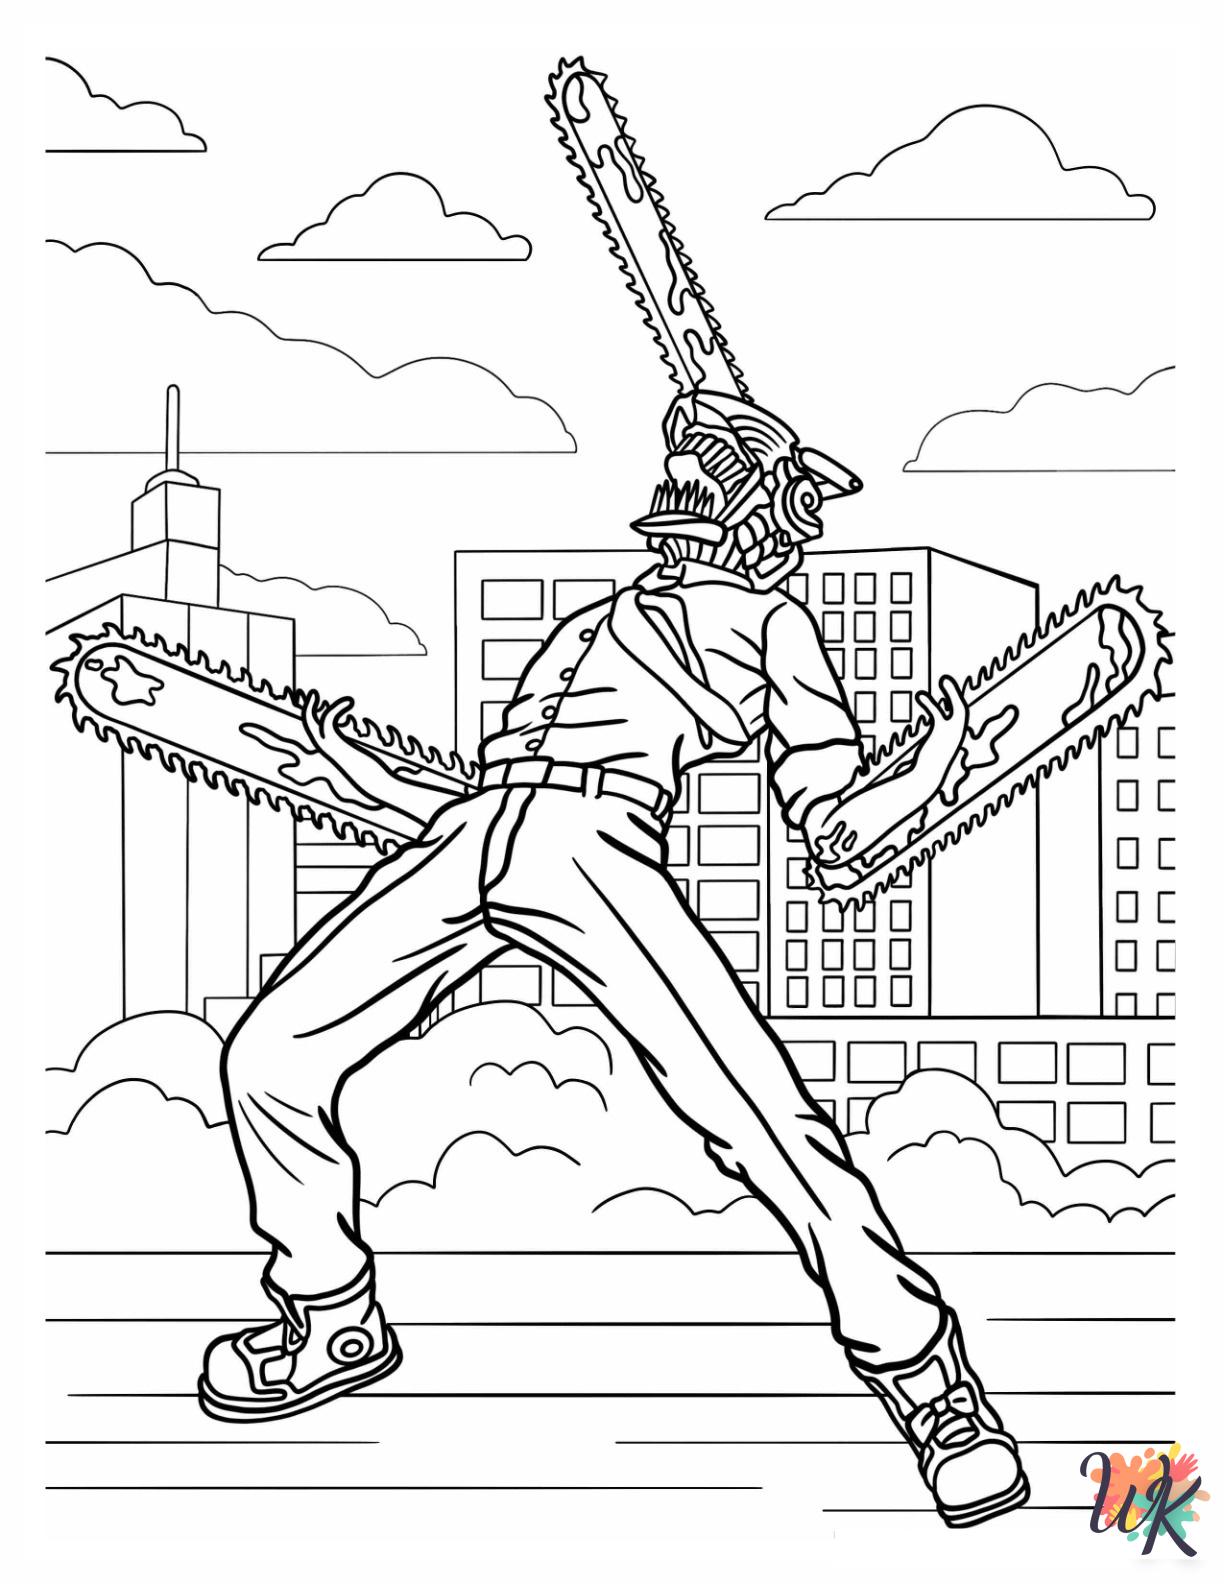 Chainsaw Man coloring pages printable